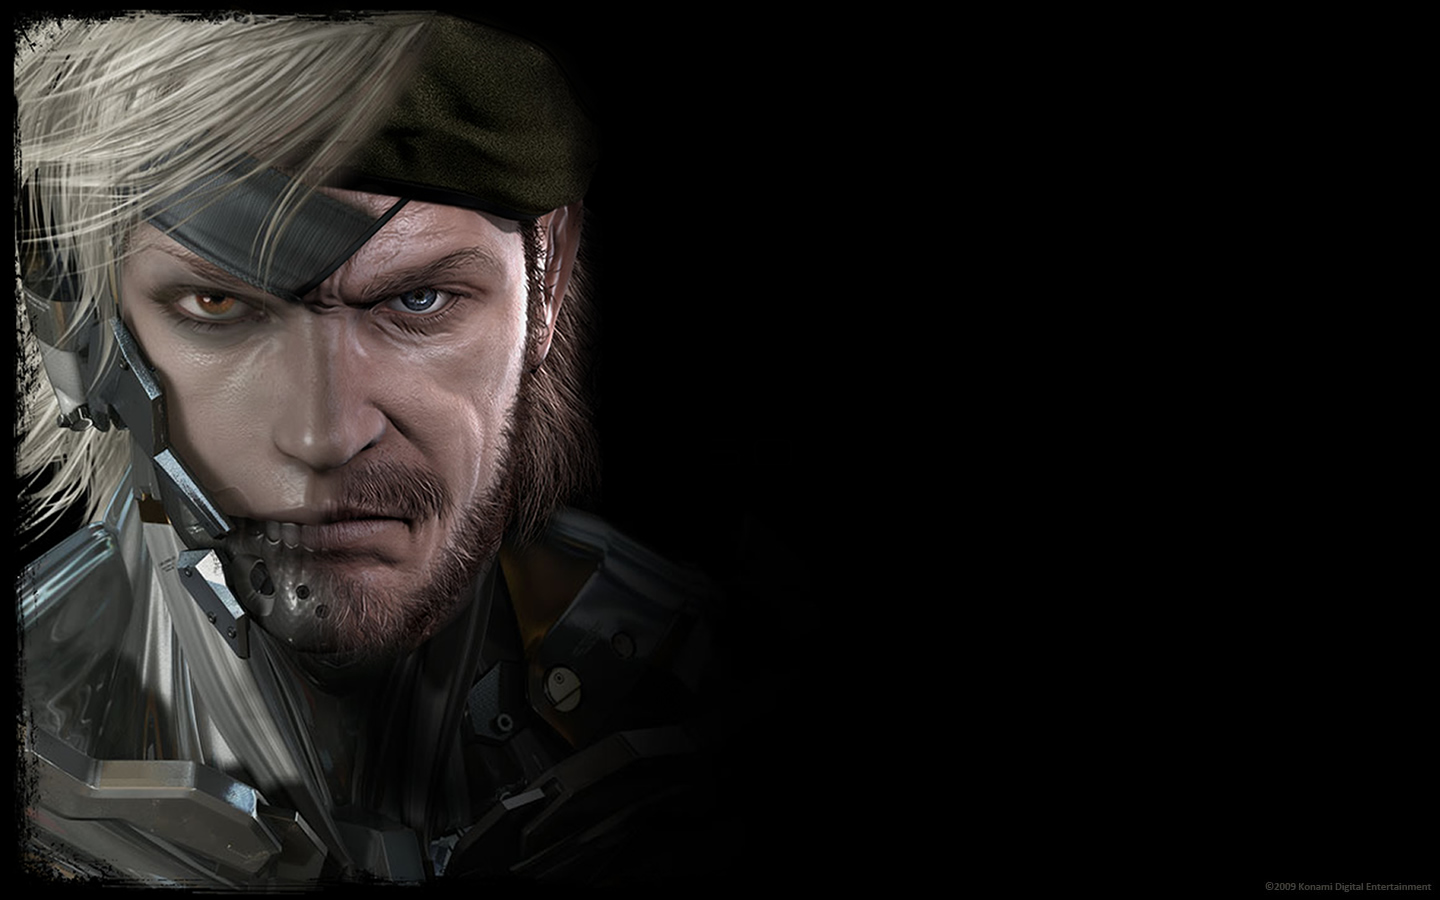 Free Download Mgs Teaser Wallpaper 1440x900 For Your Desktop Mobile Tablet Explore 76 Mgs Wallpapers Metal Gear Solid 3 Wallpaper Metal Gear Solid Desktop Wallpaper Metal Gear Solid 5 Wallpaper